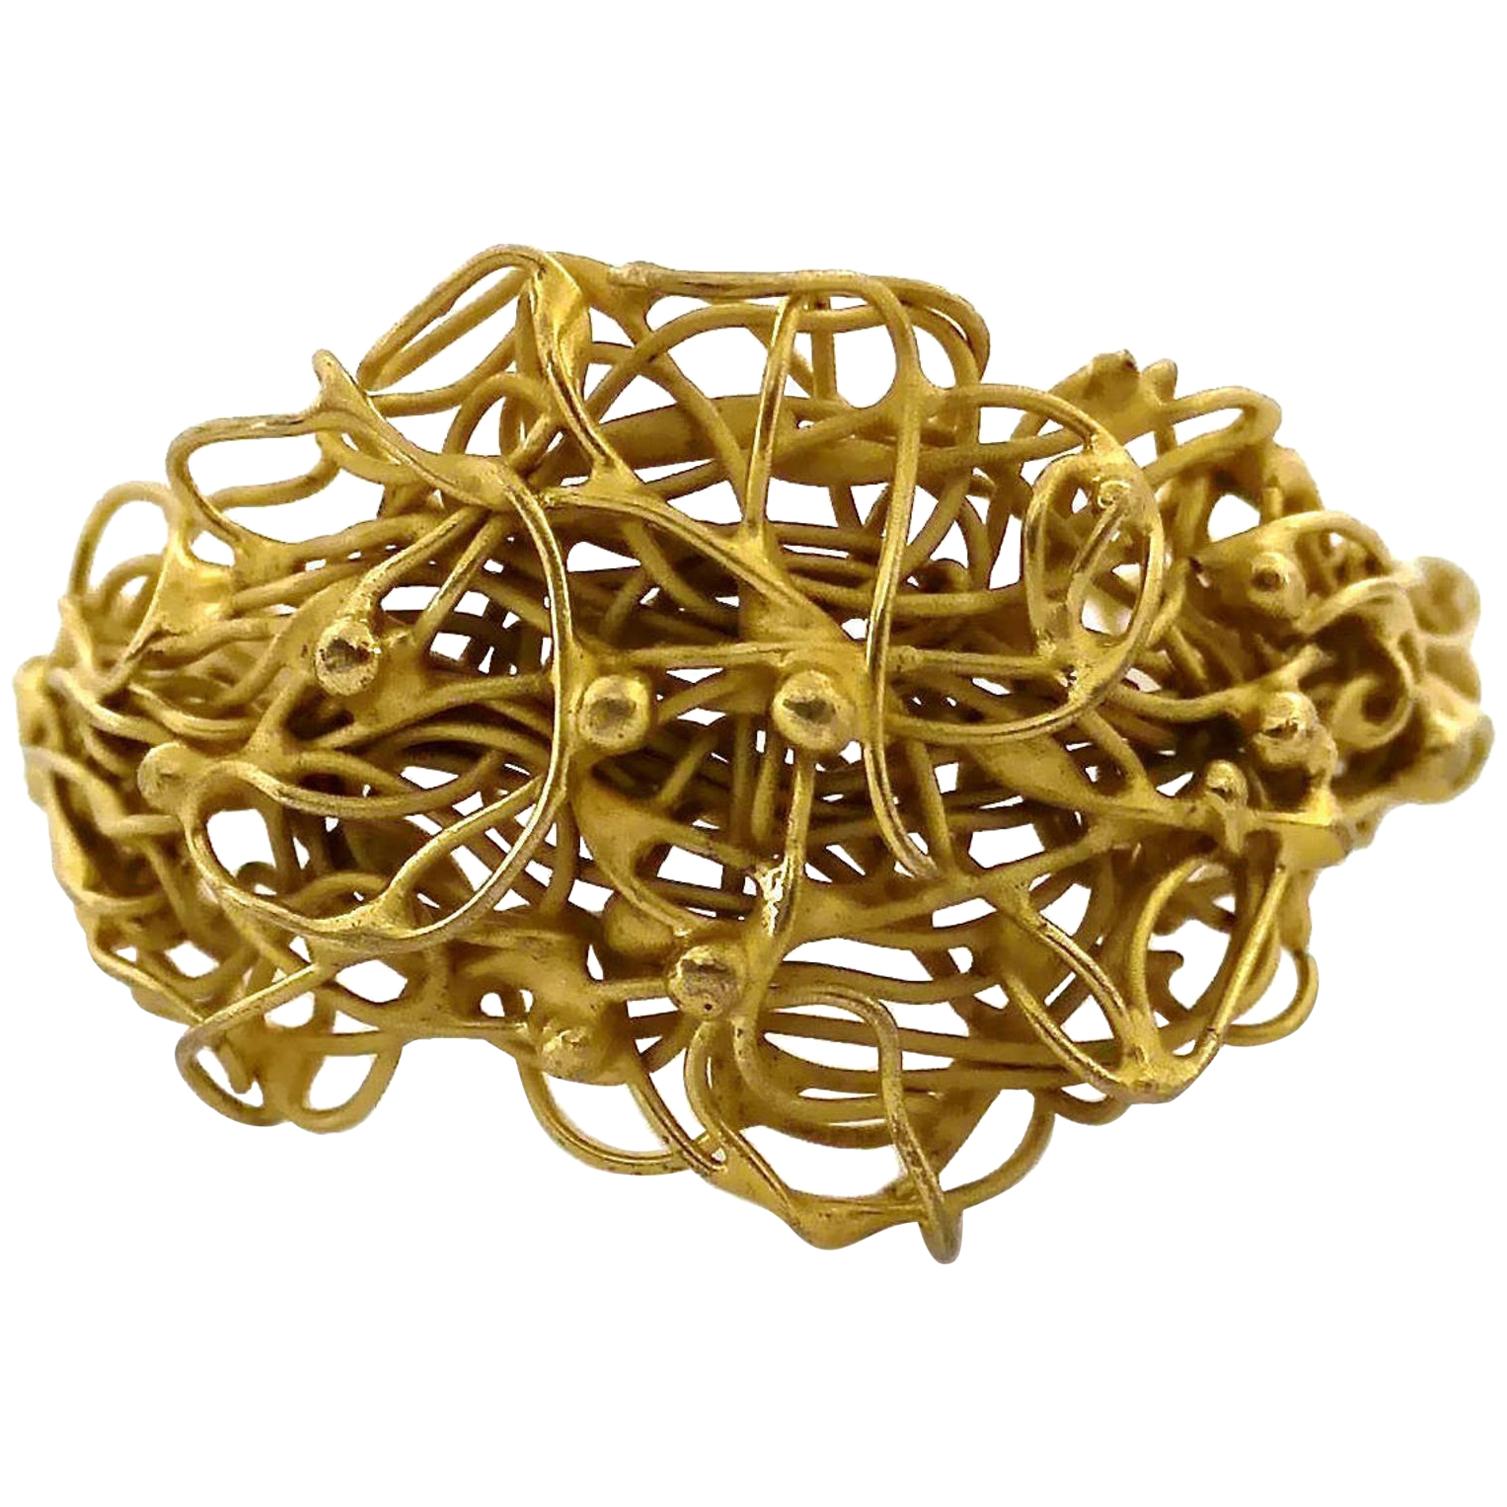 Vintage French Unsigned Knotted Coiled Wire Cuff Bracelet